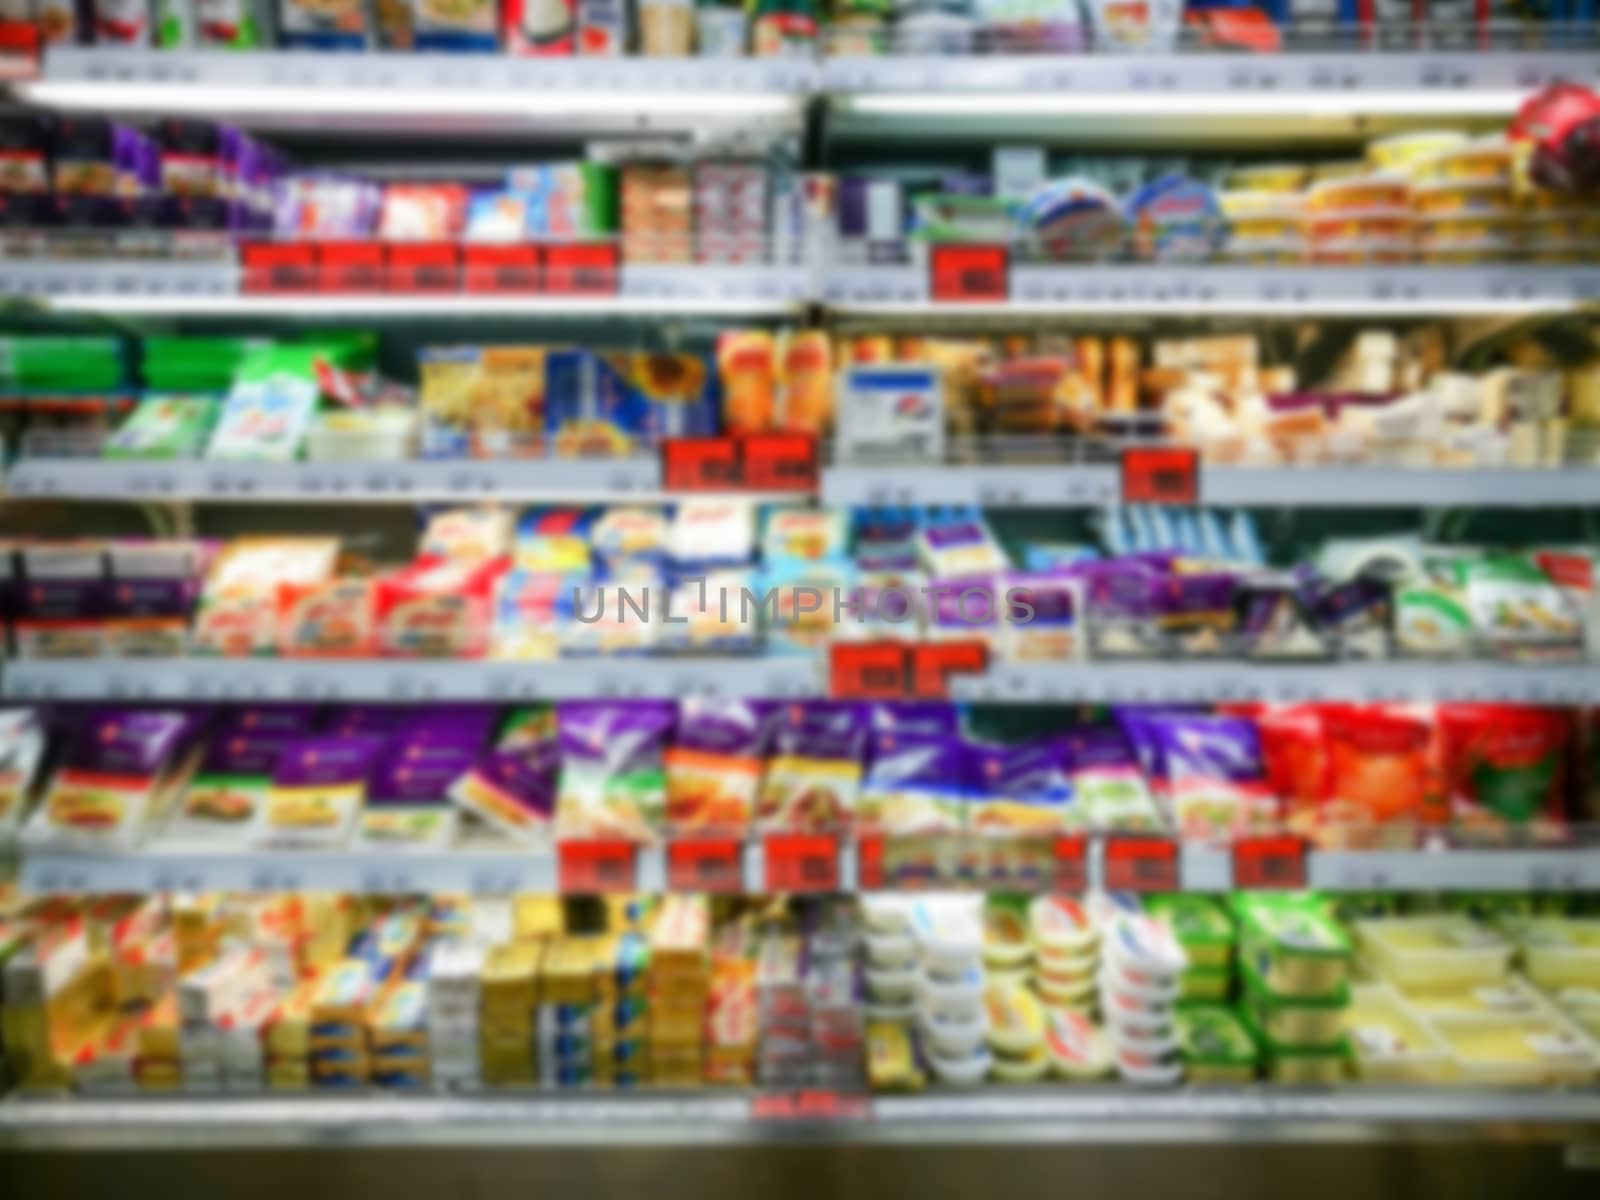 Blurred of product shelves in supermarket or grocery store, use  by yuiyuize